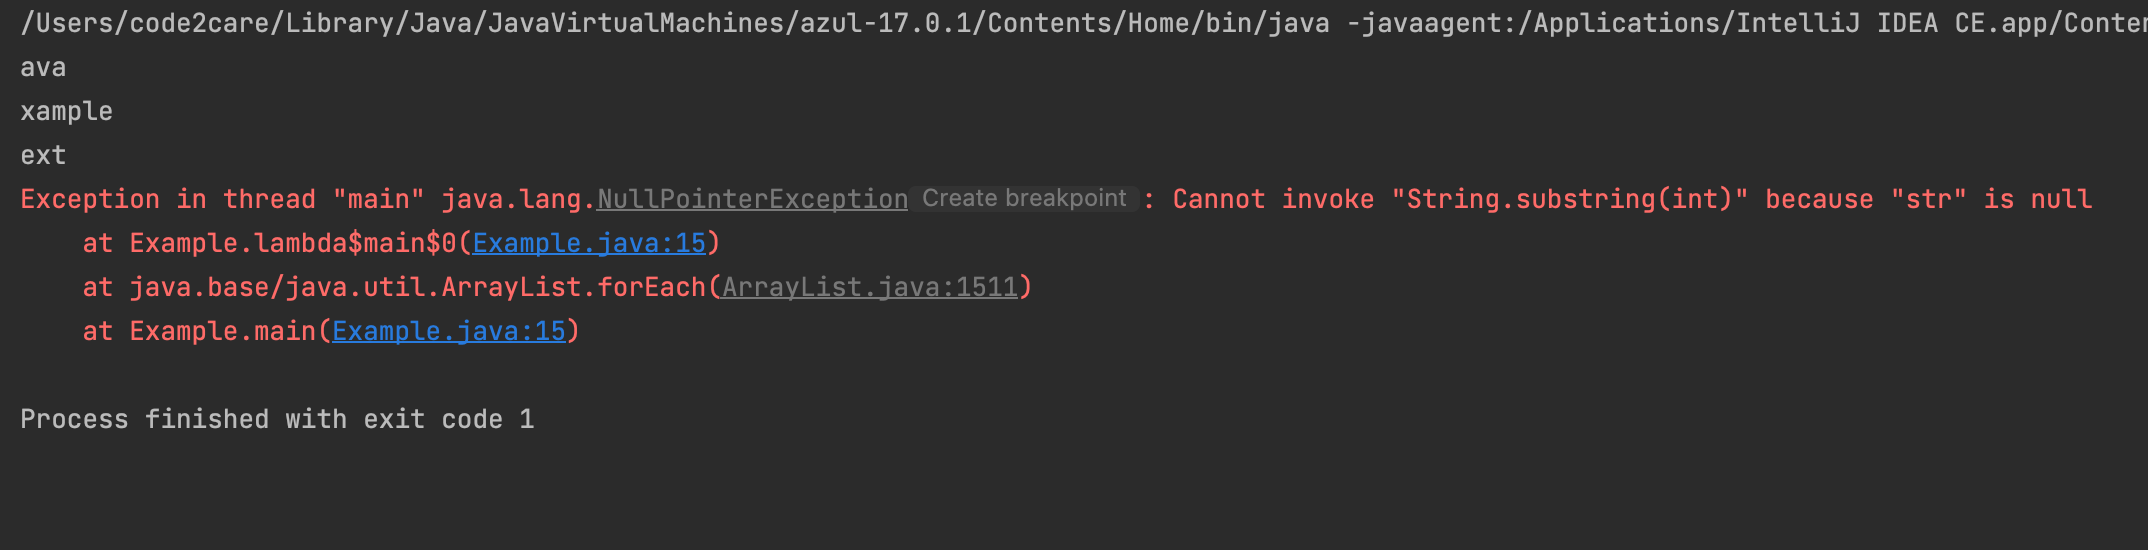 Java 8 Exception - cannot invoke because object is null